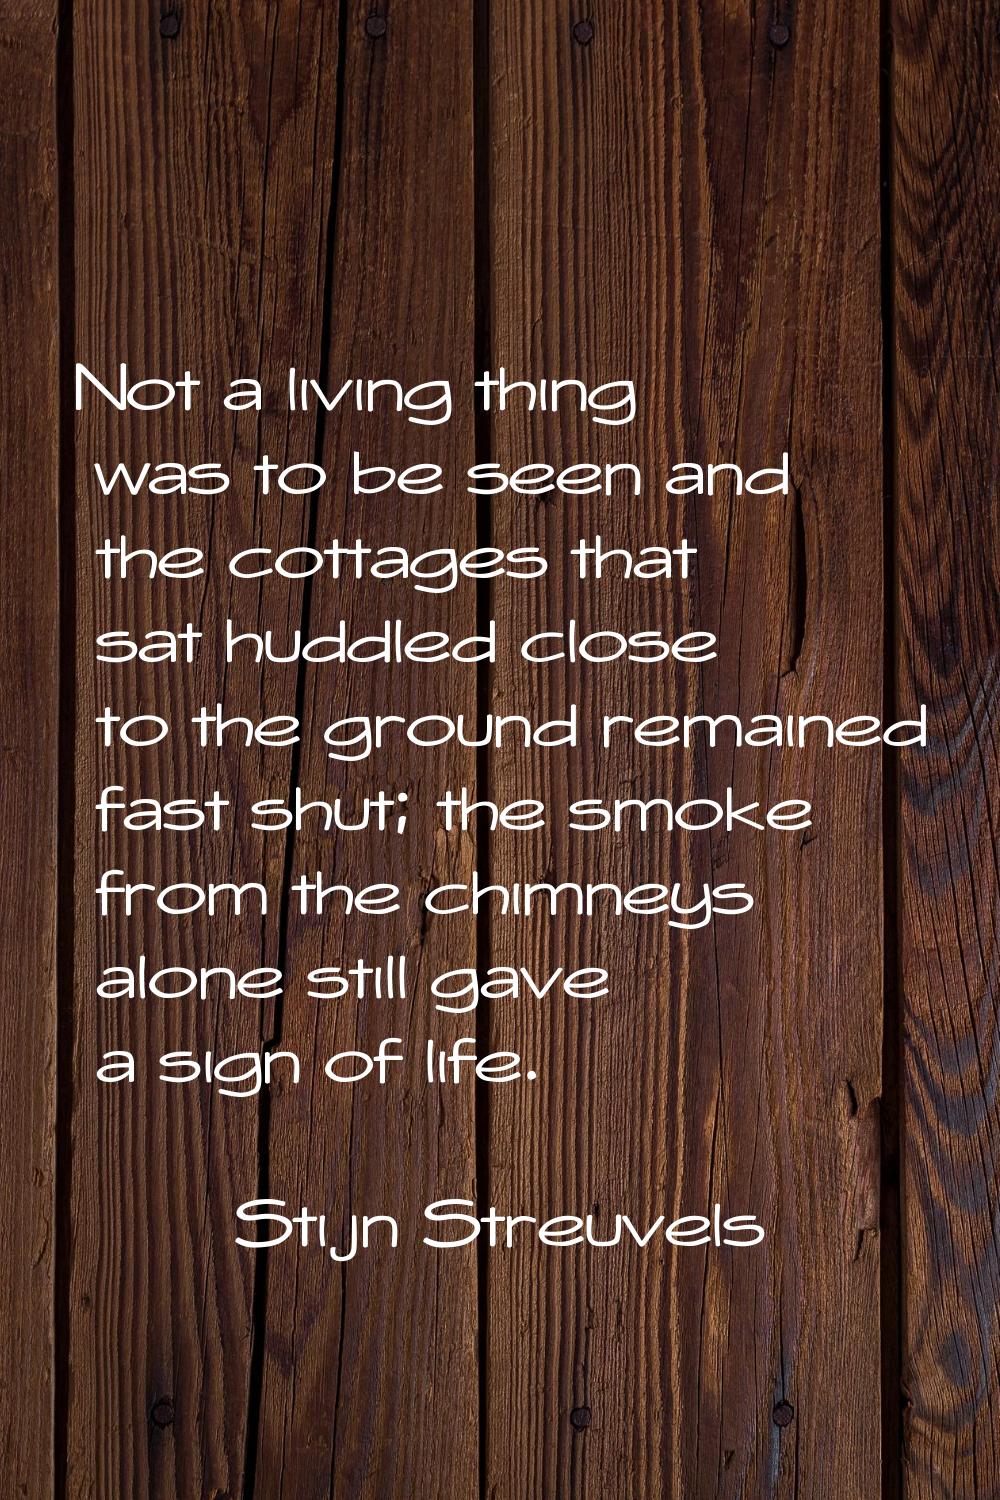 Not a living thing was to be seen and the cottages that sat huddled close to the ground remained fa